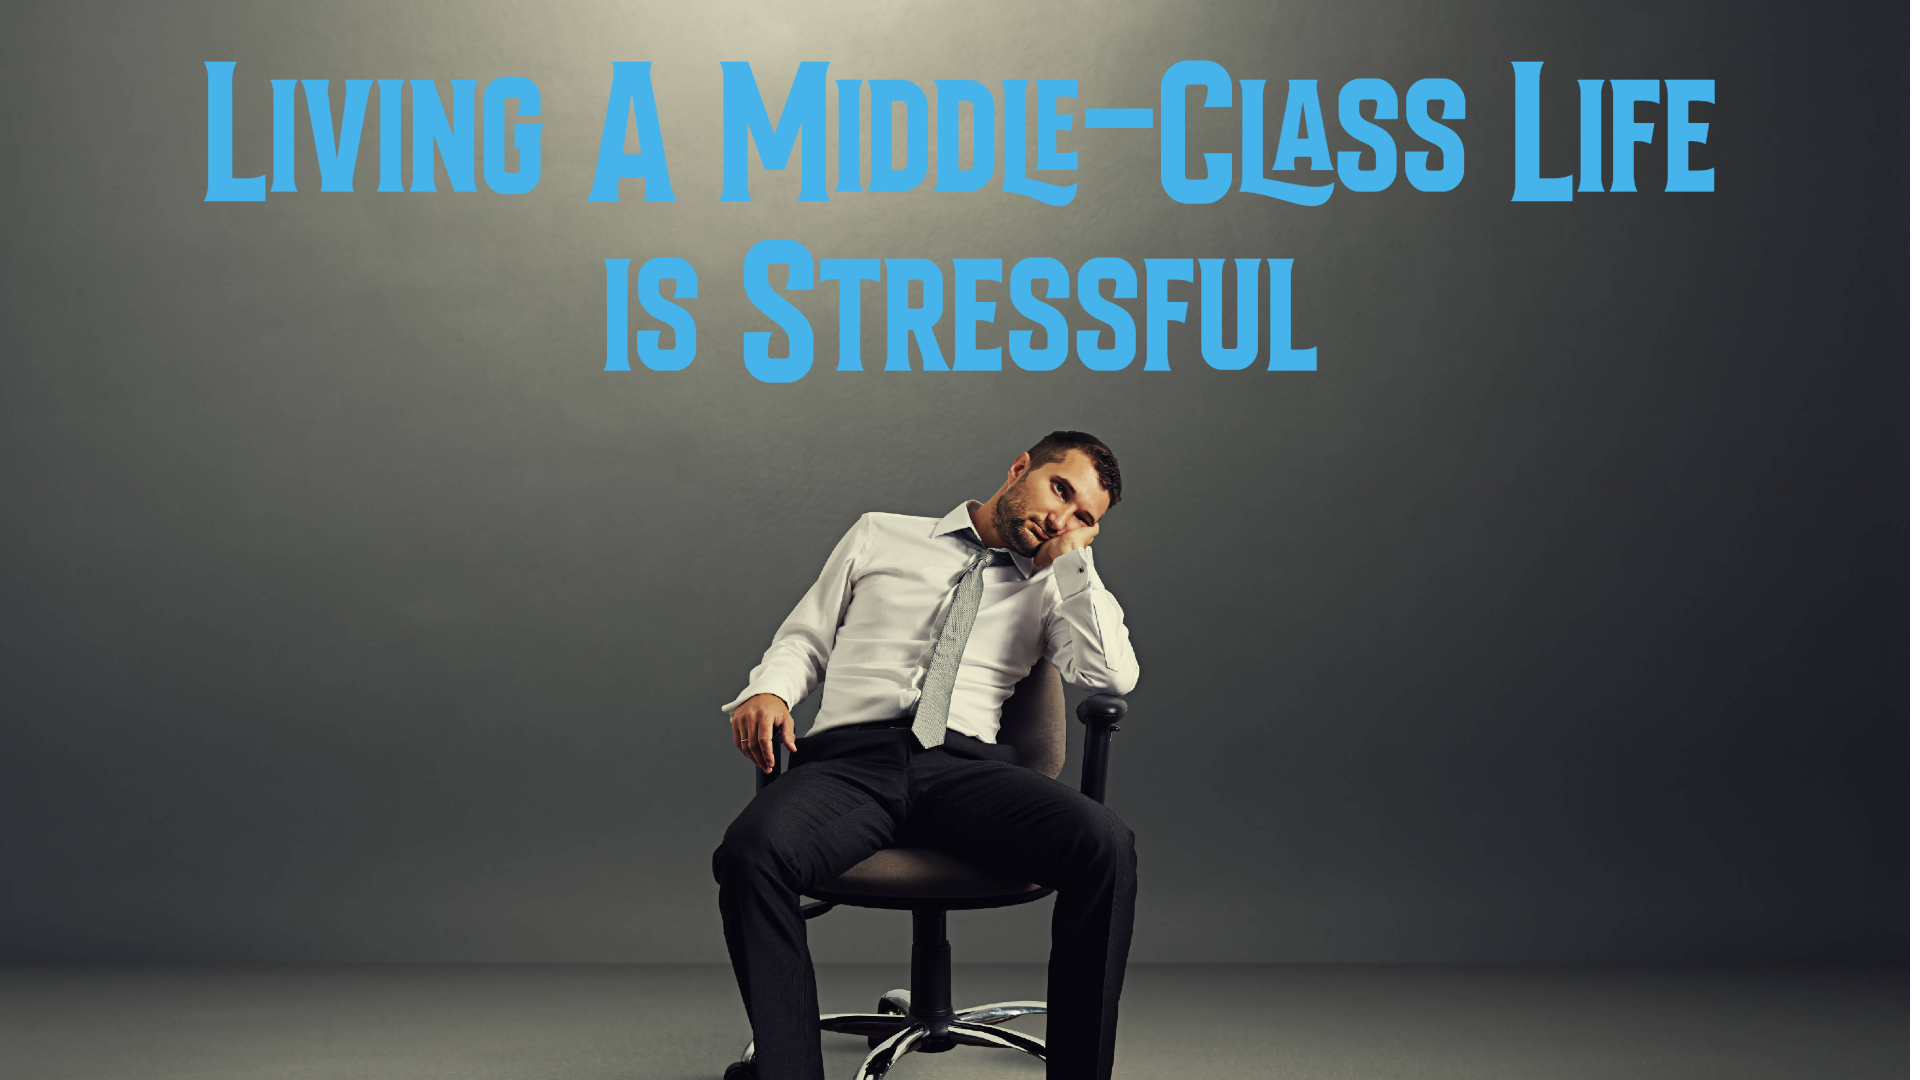 Living a Middle-Class Life is Stressful